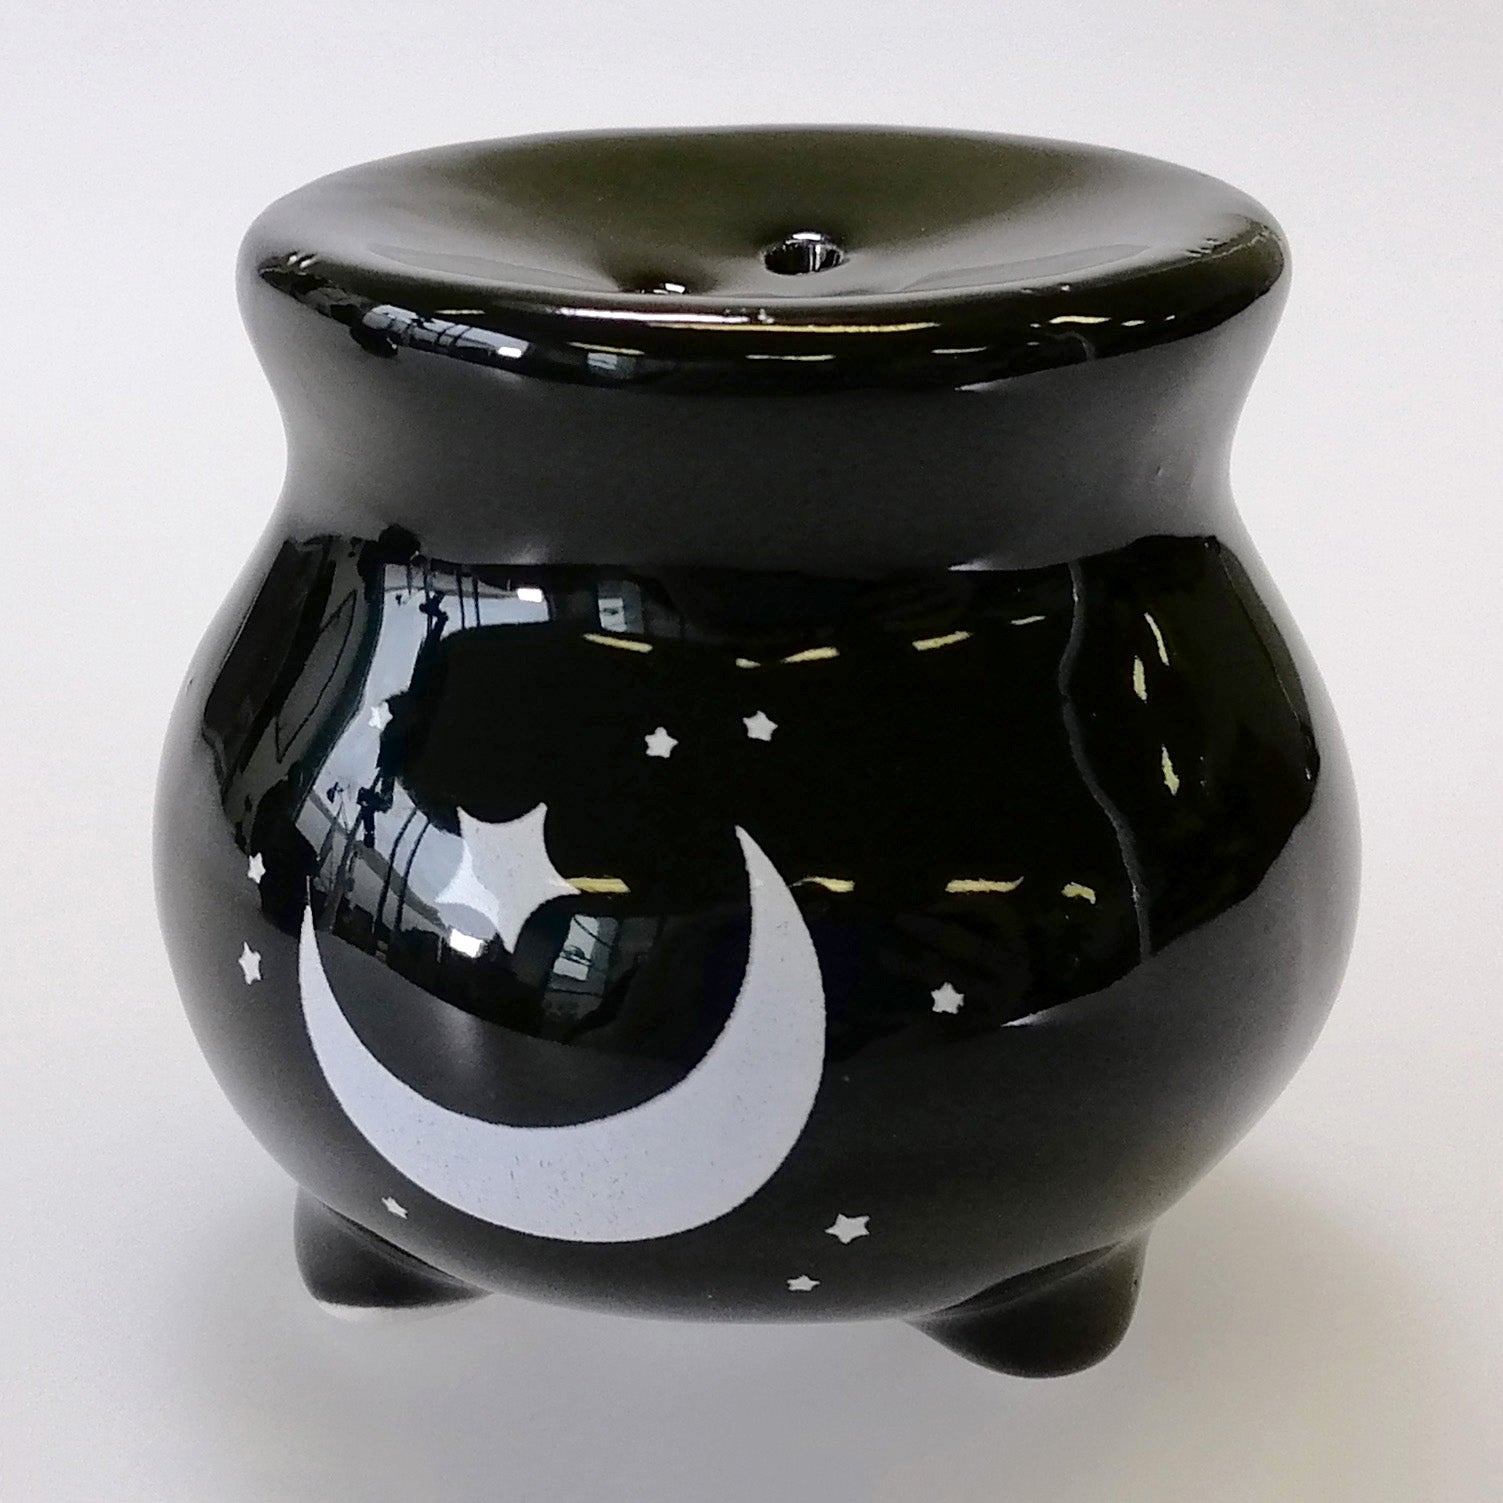 Witches' Brew' Collectible Ceramic Salt & Pepper Set